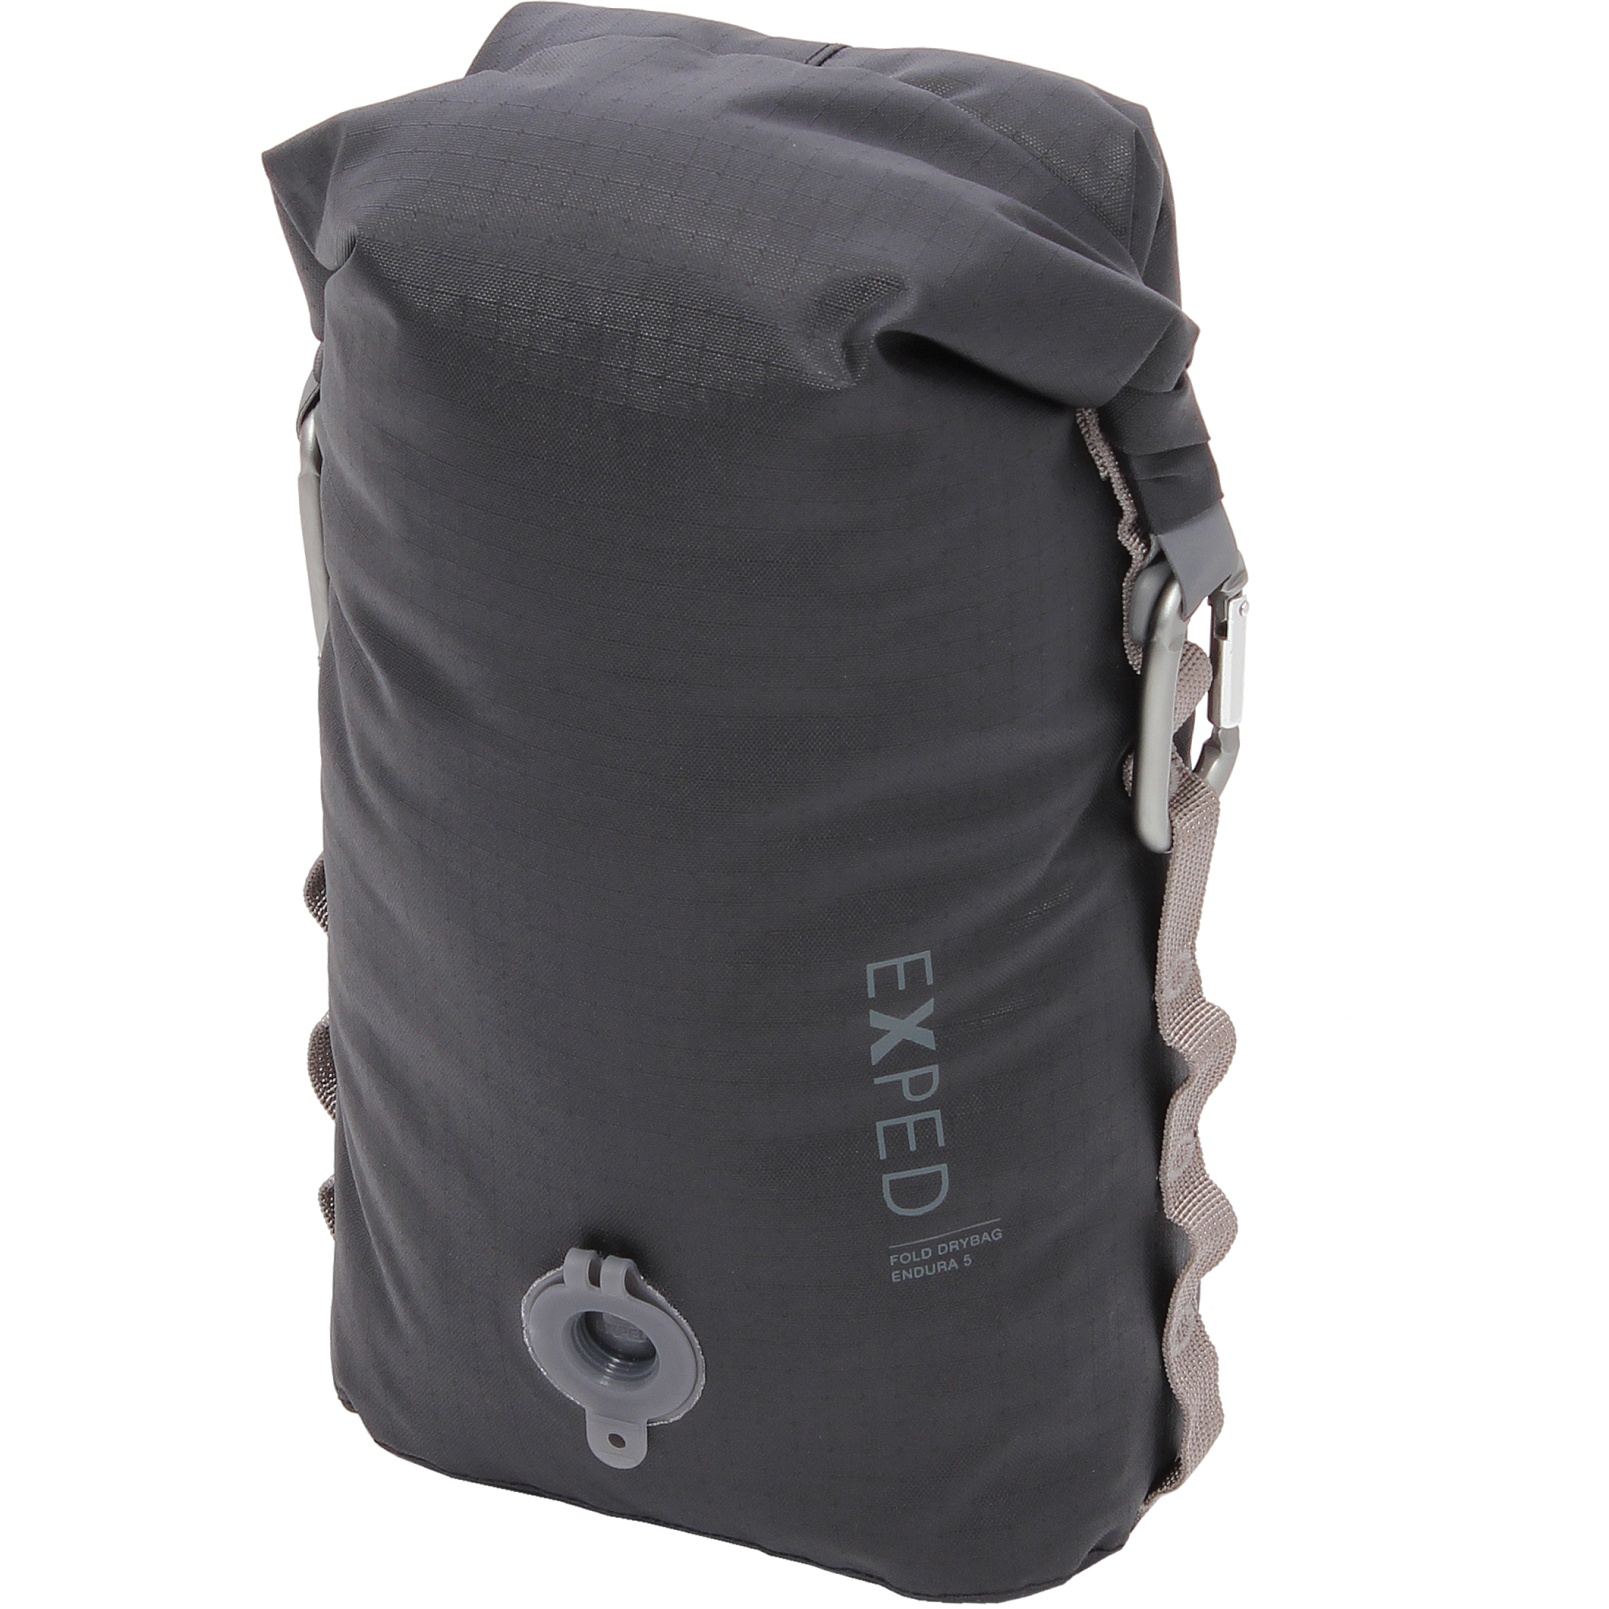 Picture of Exped Fold Drybag Endura - 5L - black